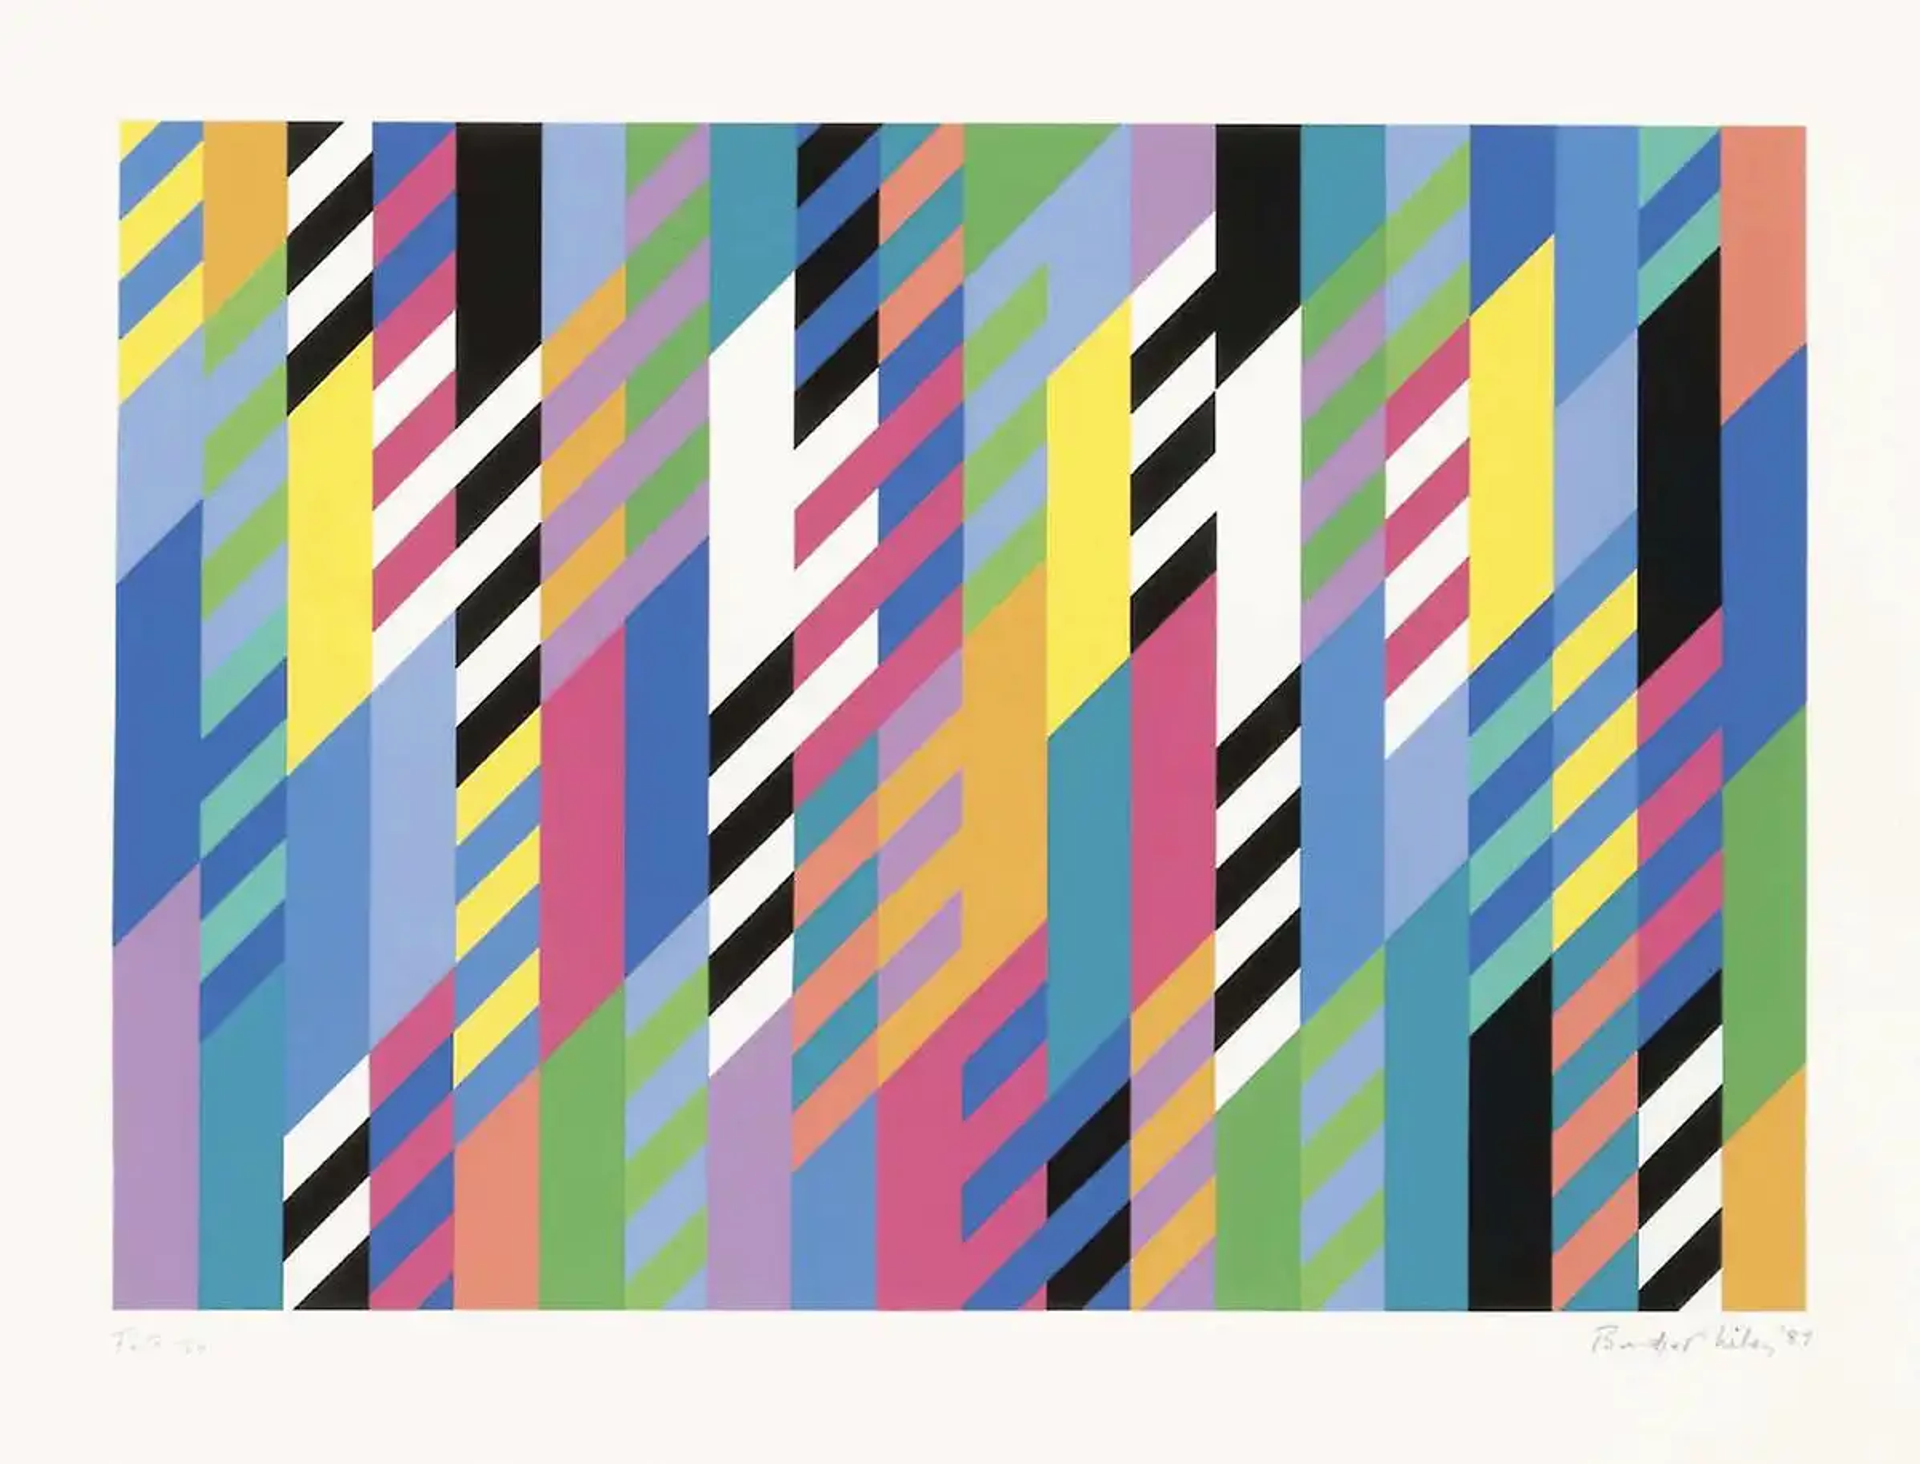 The design of Fête relates to other works featuring zigs or rhomboids which Riley produced between 1986 and 1997. All the works included similarly feature vertical bands combined with diagonally orientated areas of contrasting colour. Moving away from the lines and geometric shapes that defined her earlier works, in the Zig/ Rhomboid works, distinctions between colour and shape fall away, each leaning on the other for definition within the same plane.